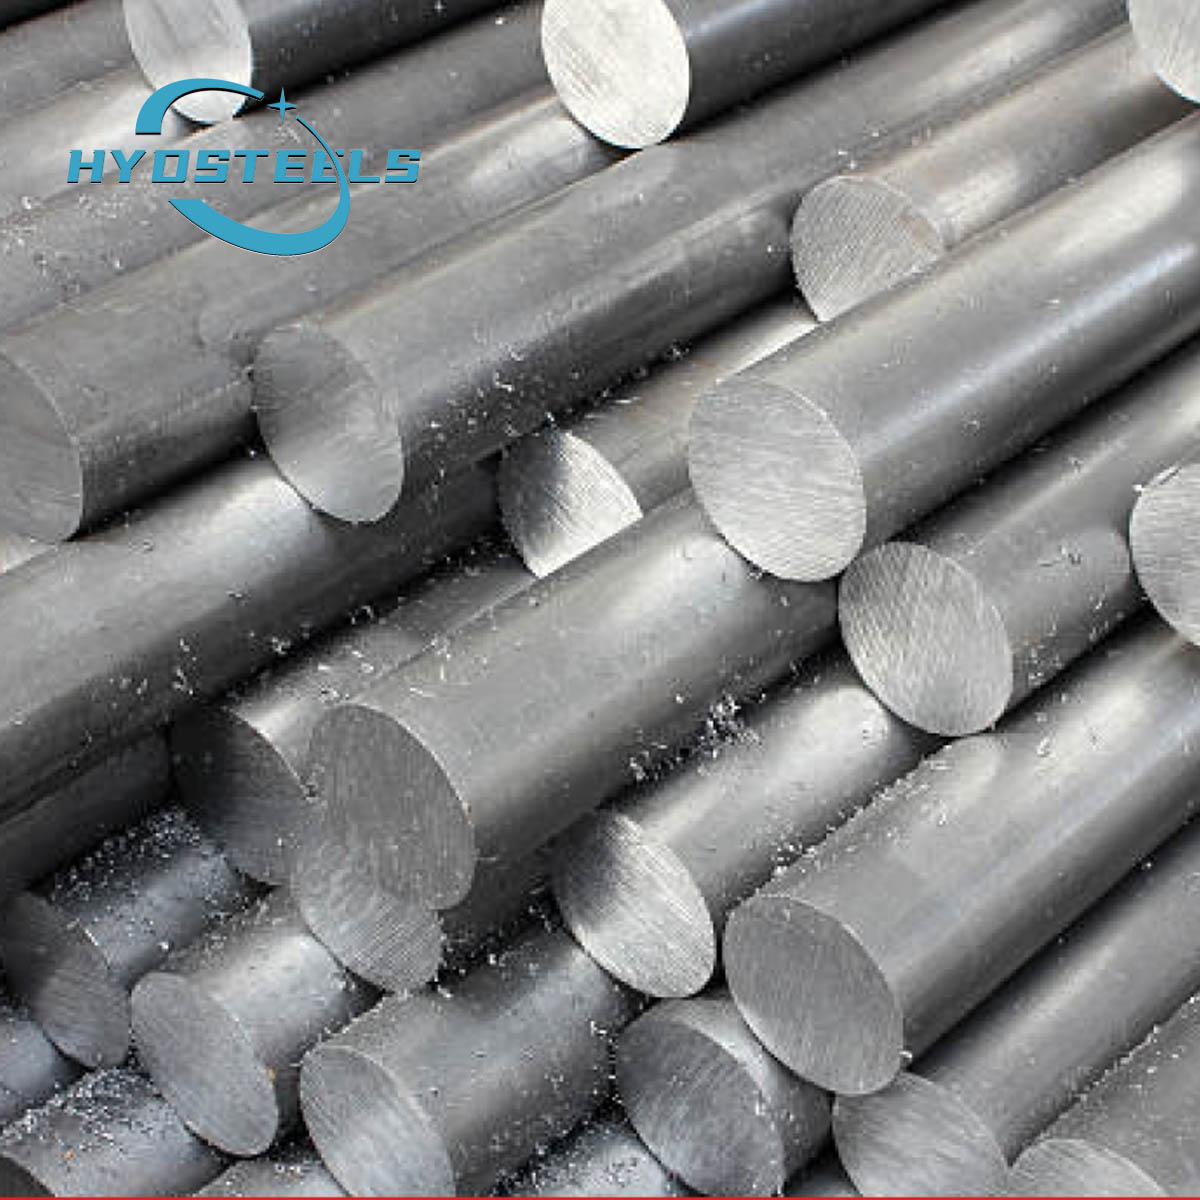  High Quatity Hydraulic Cylinder Chrome Plated Rod for Piston Rod Manufacturer Suppliers 